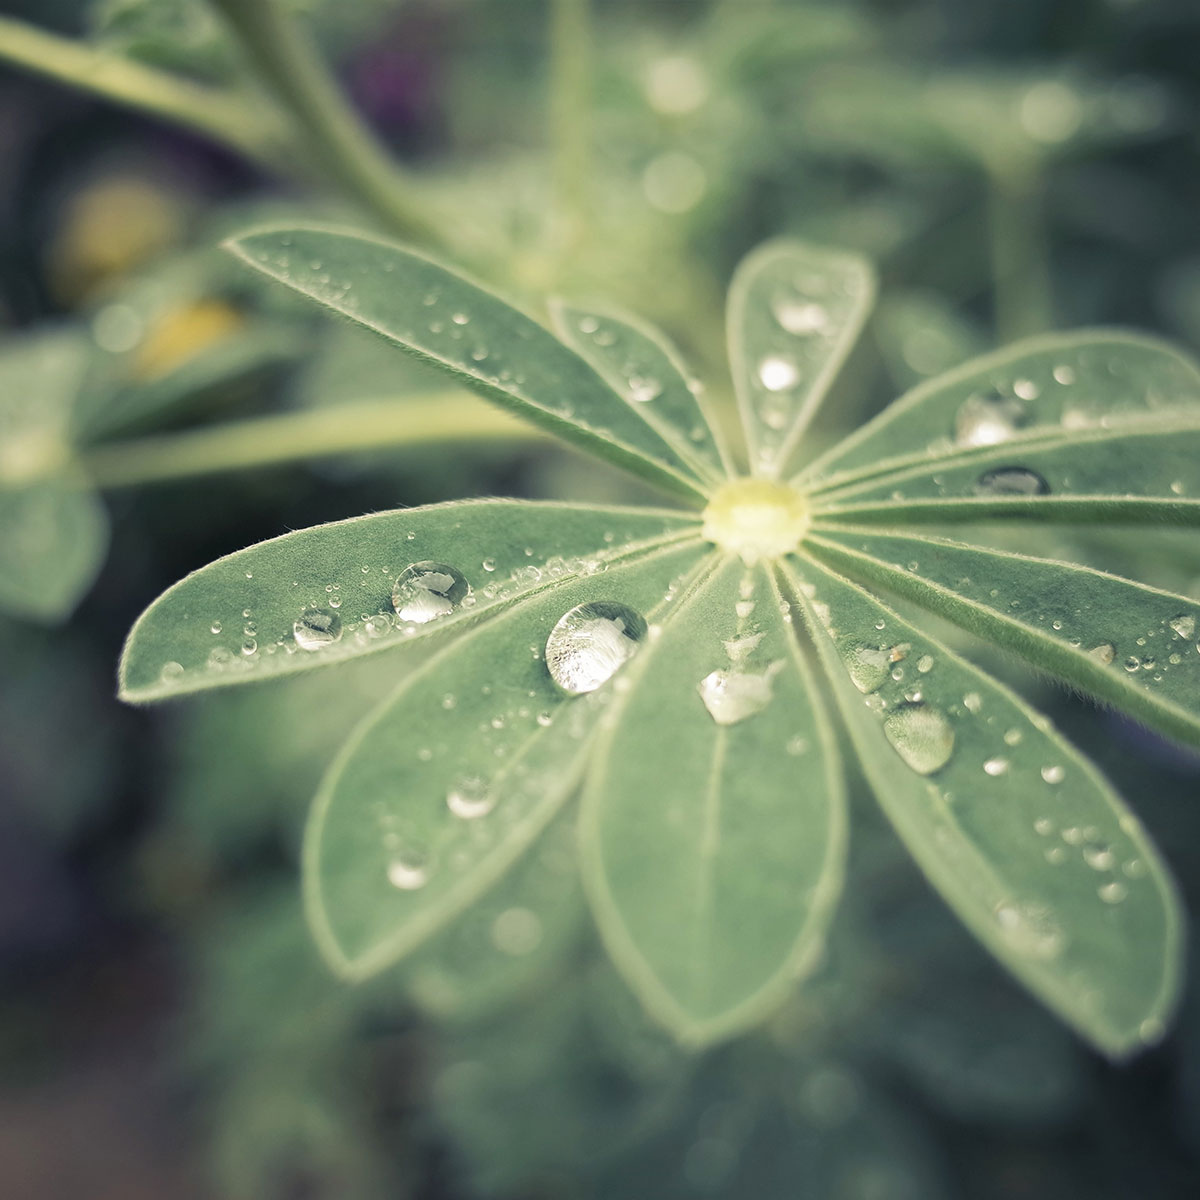 water droplets on plant